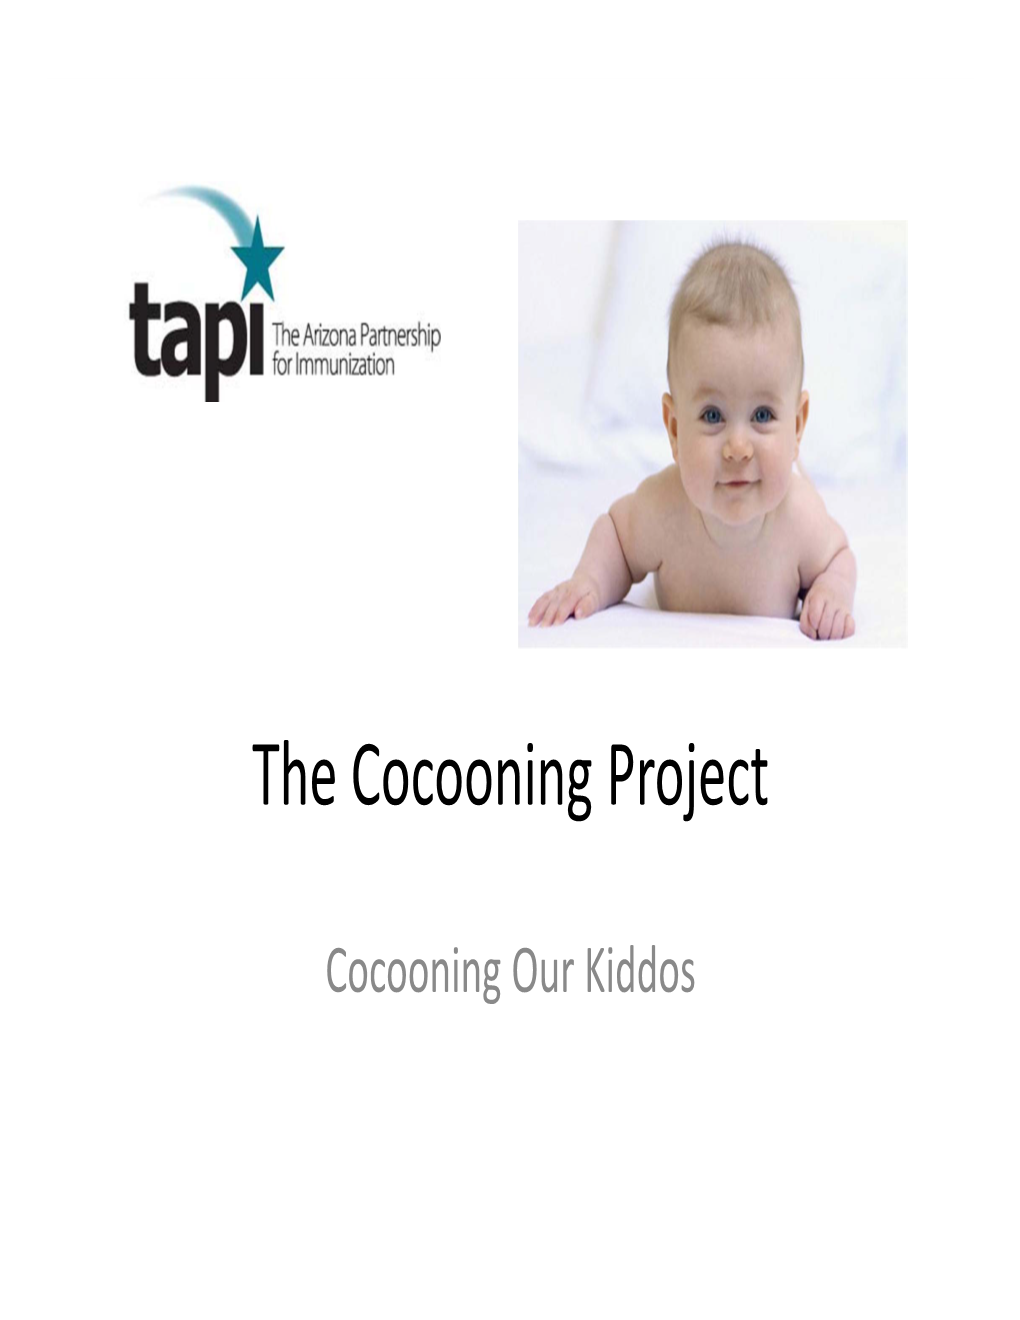 The Cocooning Project